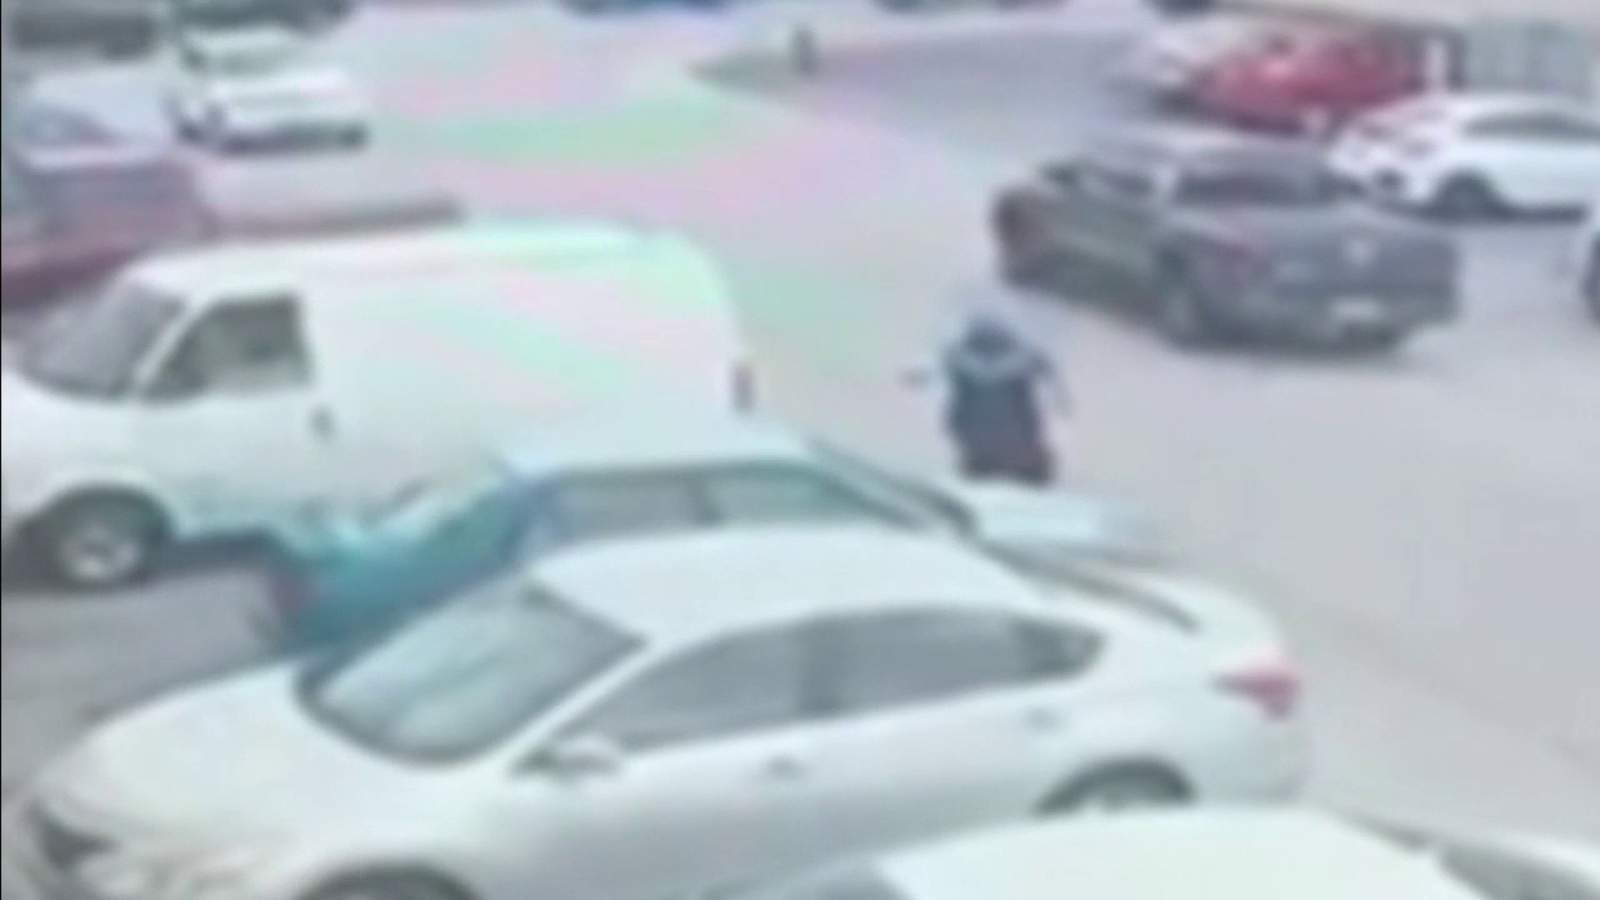 Surveillance video released of Hialeah shooting that left 2 girls injured